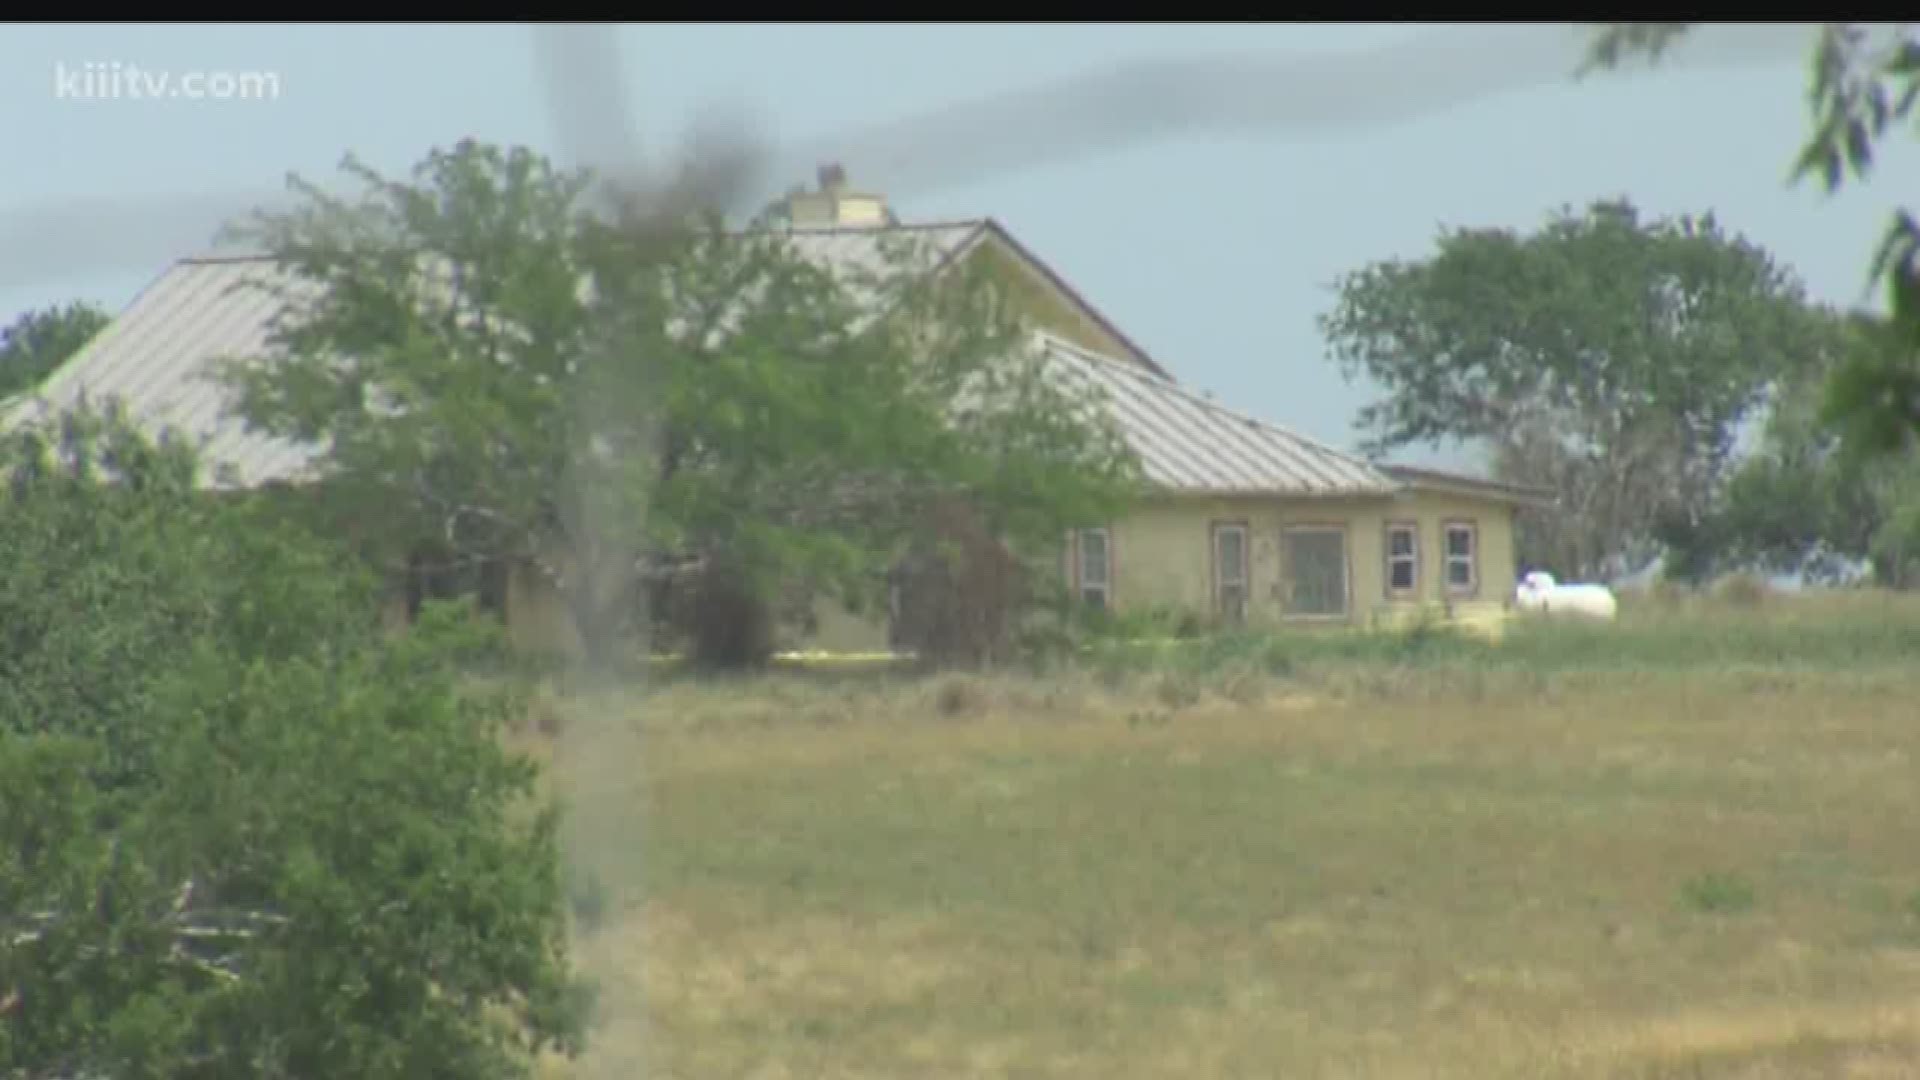 The Jim Wells County Sheriff's Office was called to the ranch at around 11:10 a.m. Thursday by the victim's parents.